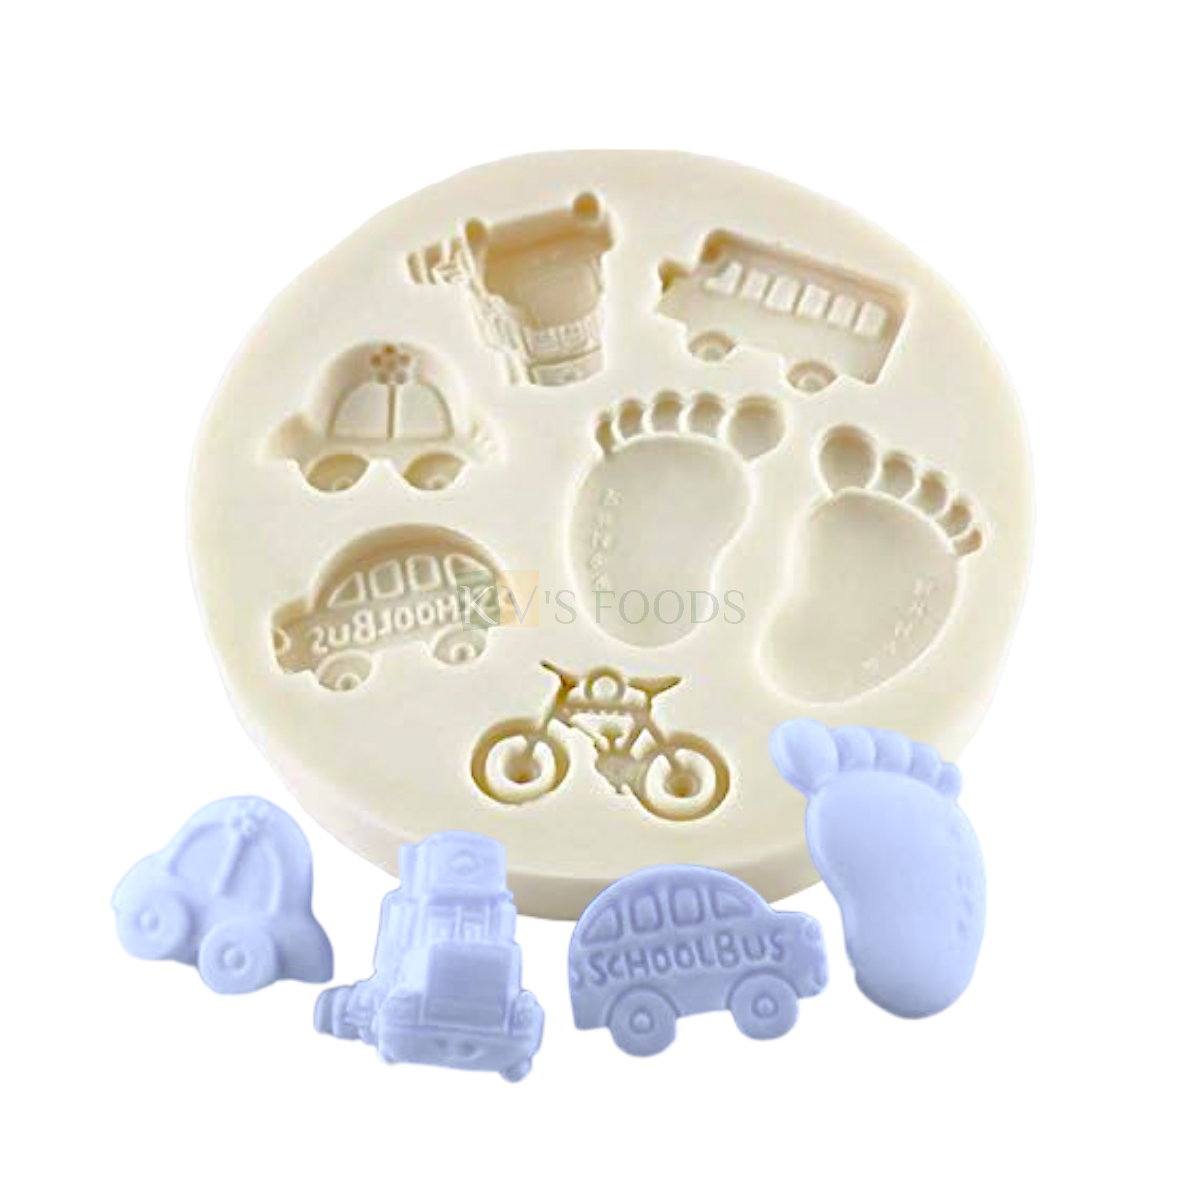 1 PC Silicone Fondant Baby Foots Car Cycle School Bus Toy Chocolate Mould 7 Cavity, Baby Themed Cake Flexible Moulds Baby Shower Theme Mini Baby Feet DIY Cake Decorating Molds